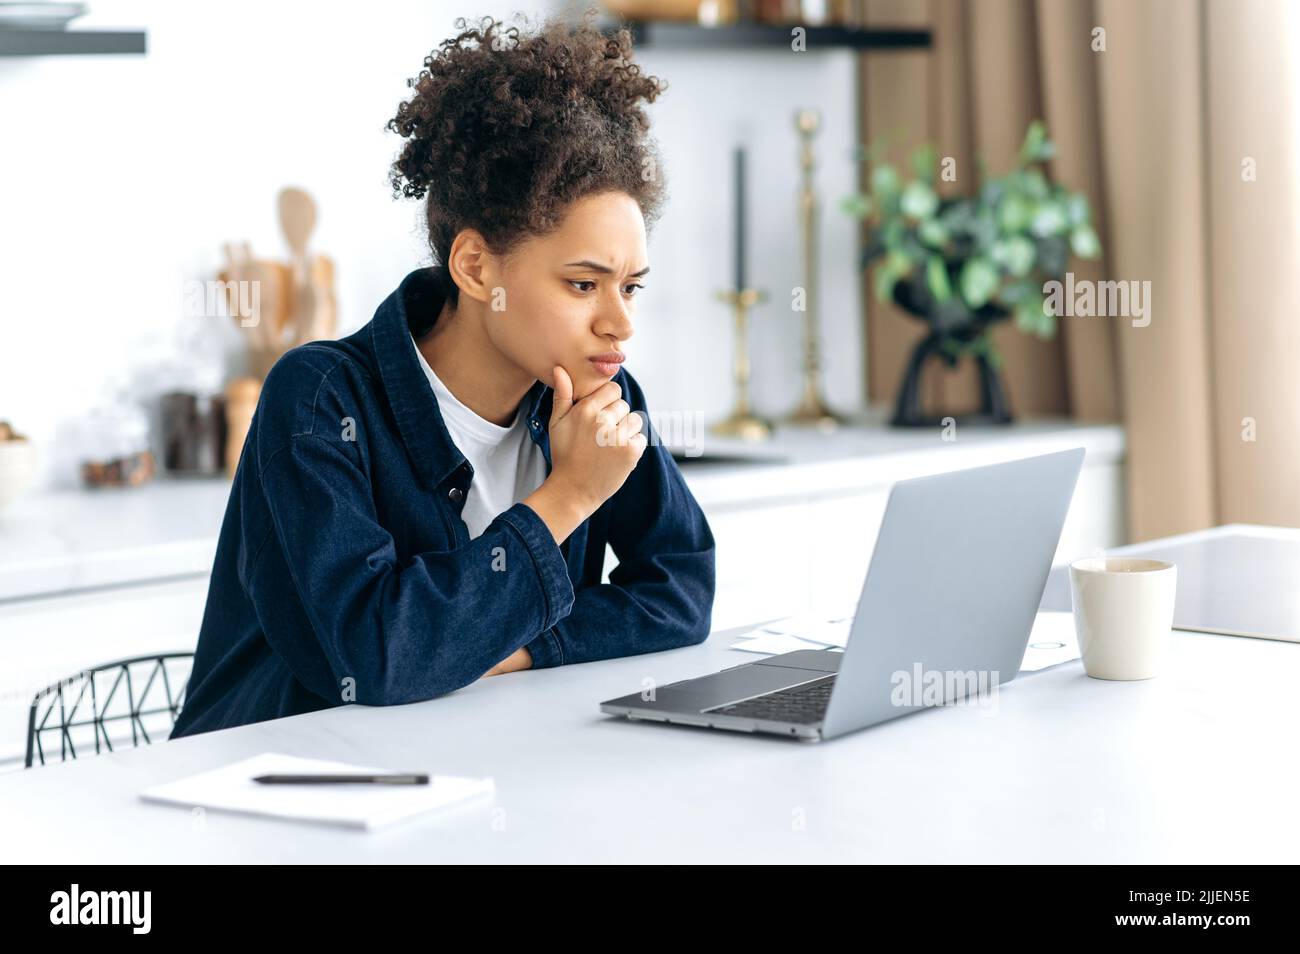 An anxious African American woman, trader, freelancer, looks worriedly at the laptop screen, monitors the situation in the financial market, concentrated analyzes the dynamics, feeling stressful Stock Photo